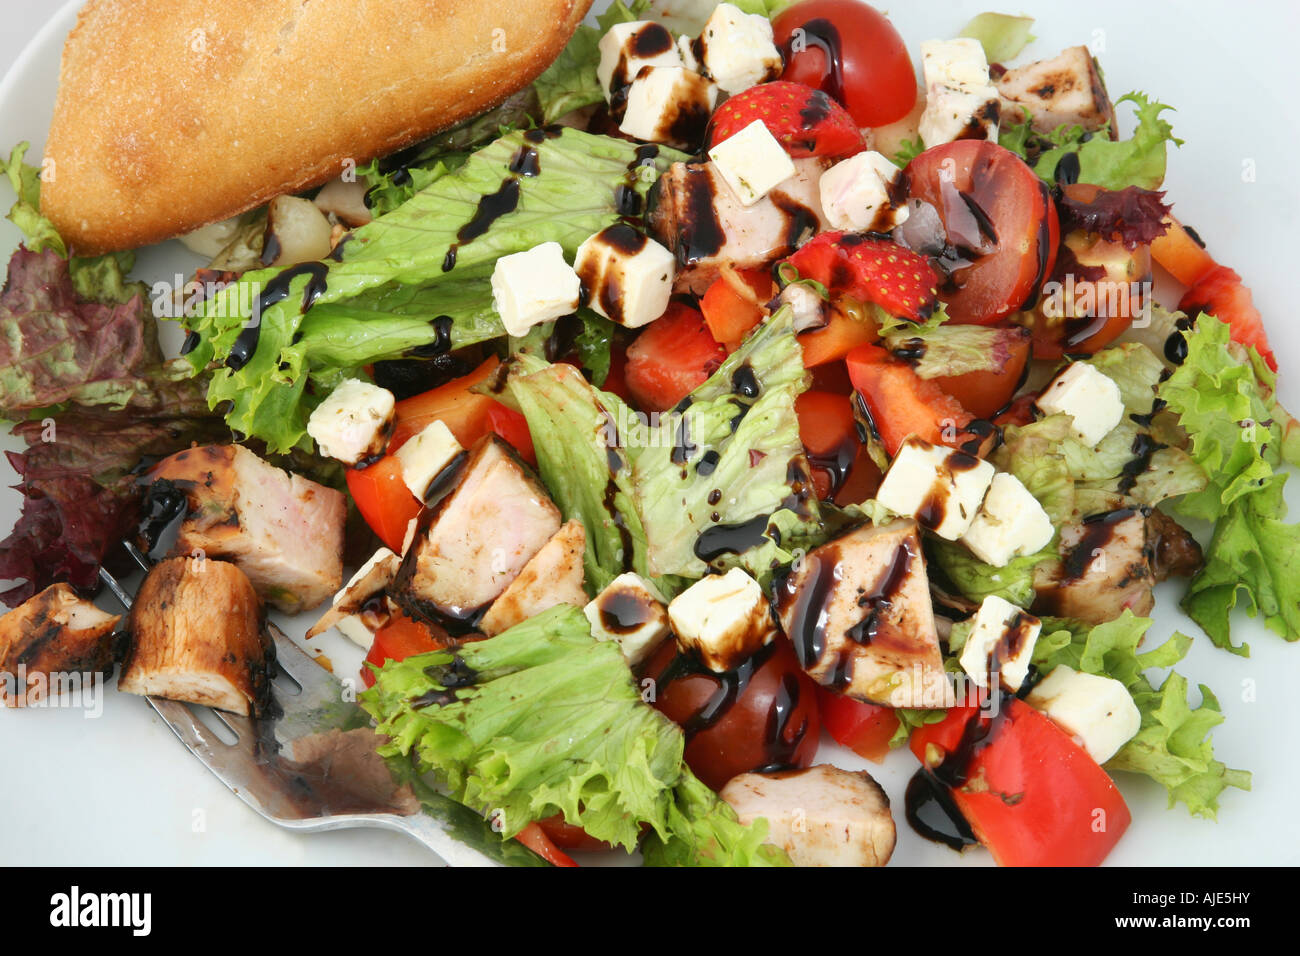 a dish of ready to eat chicken salad with bread Stock Photo